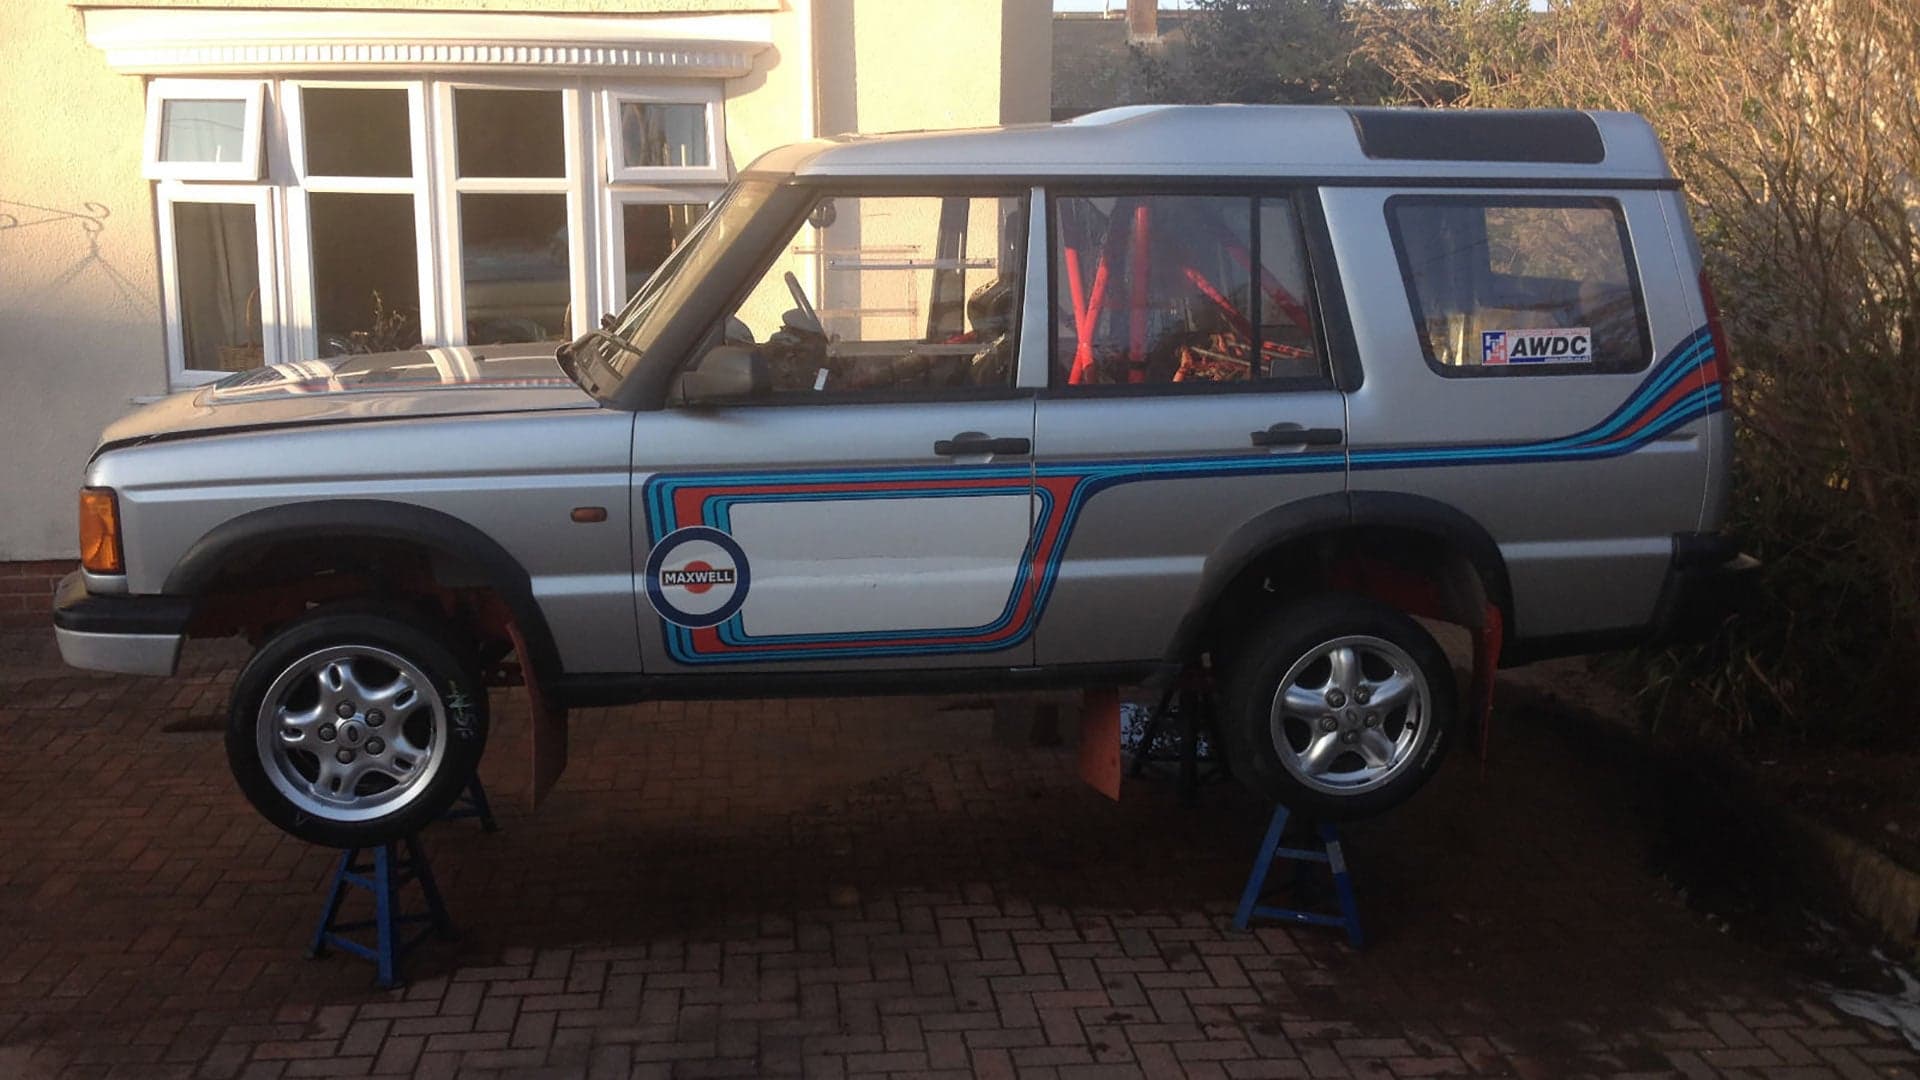 This BMW M3-Powered Land Rover Discovery Rally Car Could Be Yours